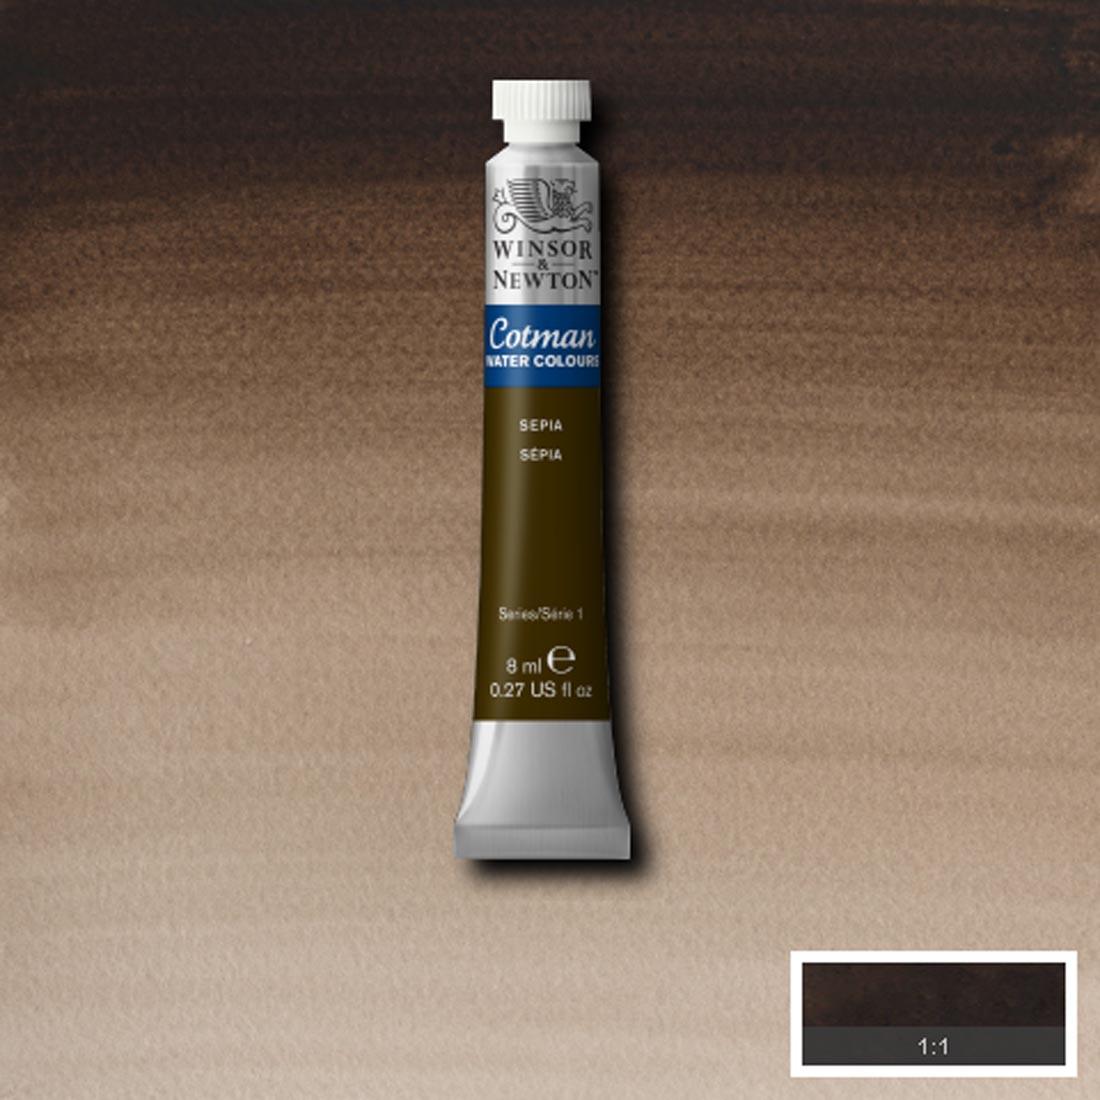 Tube of Sepia Winsor and Newton Cotman Water Colour with a paint swatch for the background